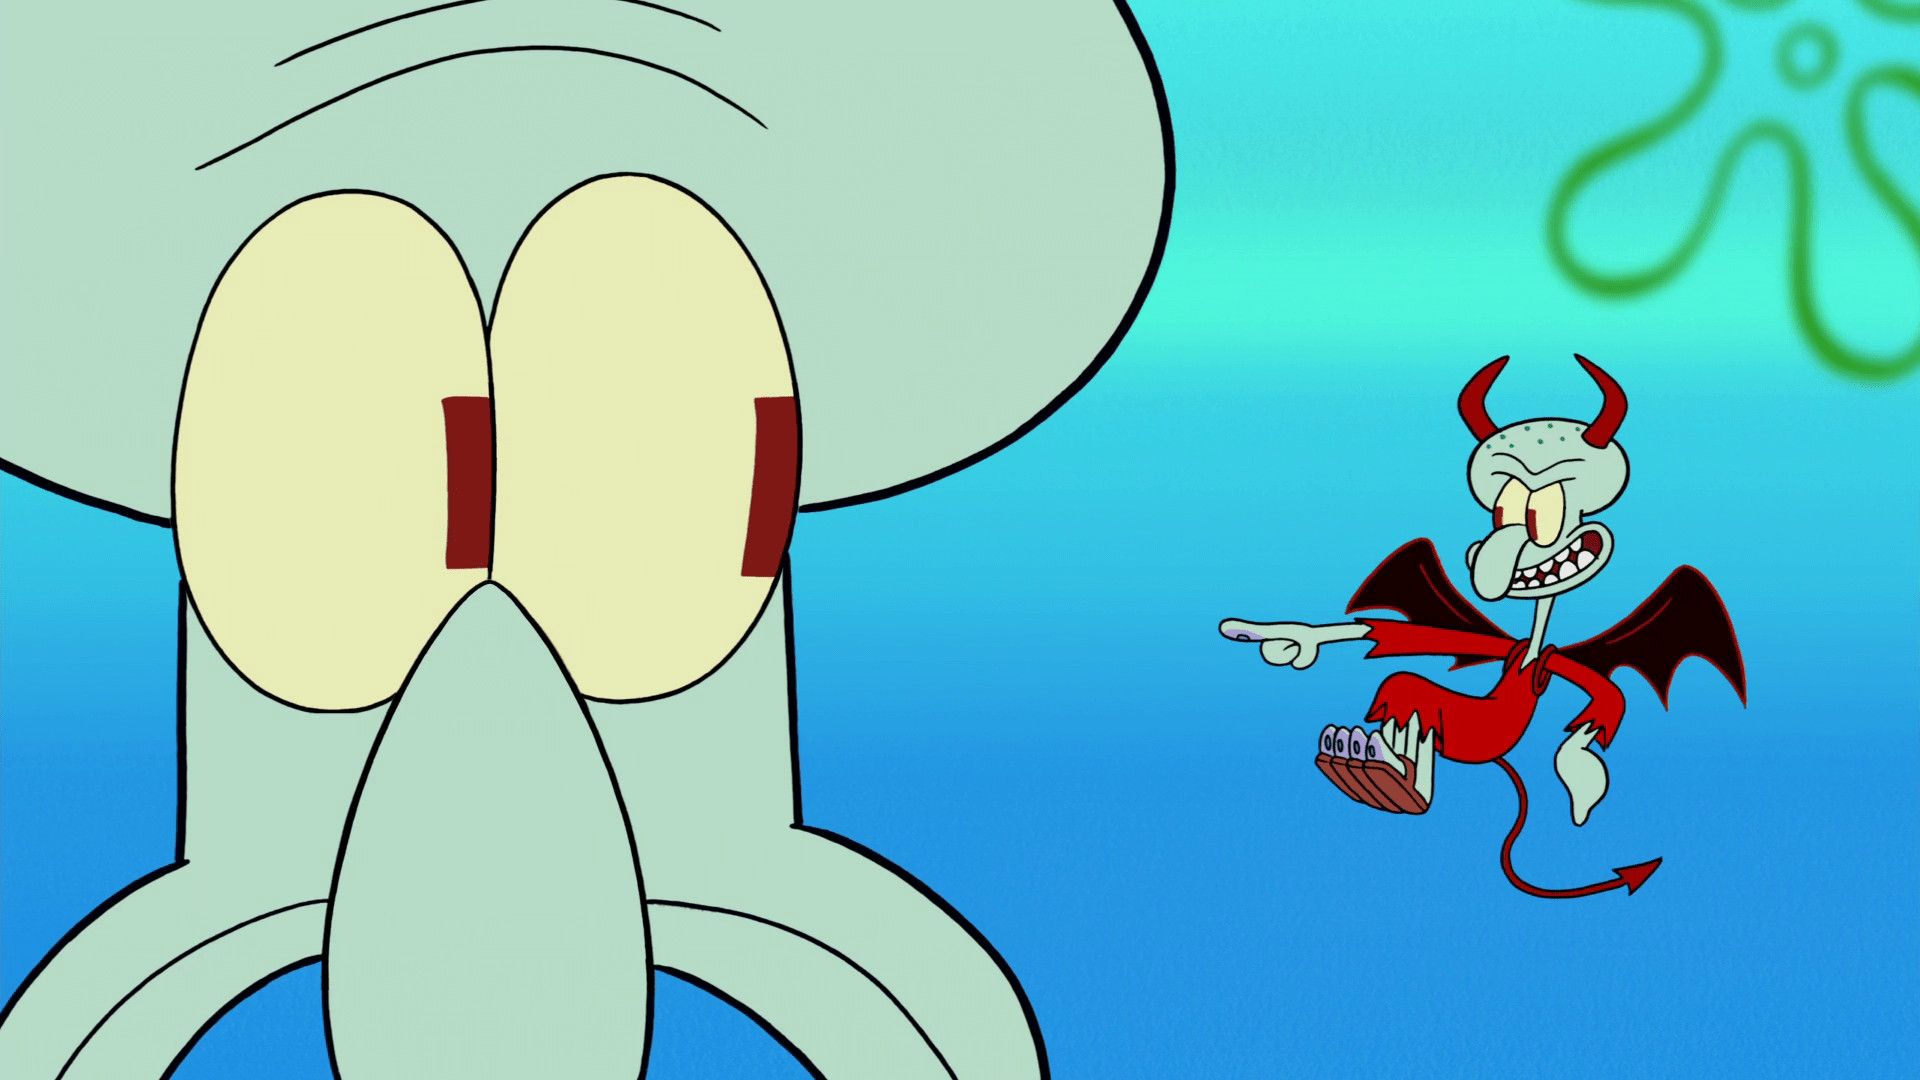 Plankton is pointing at Squidward's Krabby Patties, which are in the shape of a devil's horns - Squidward